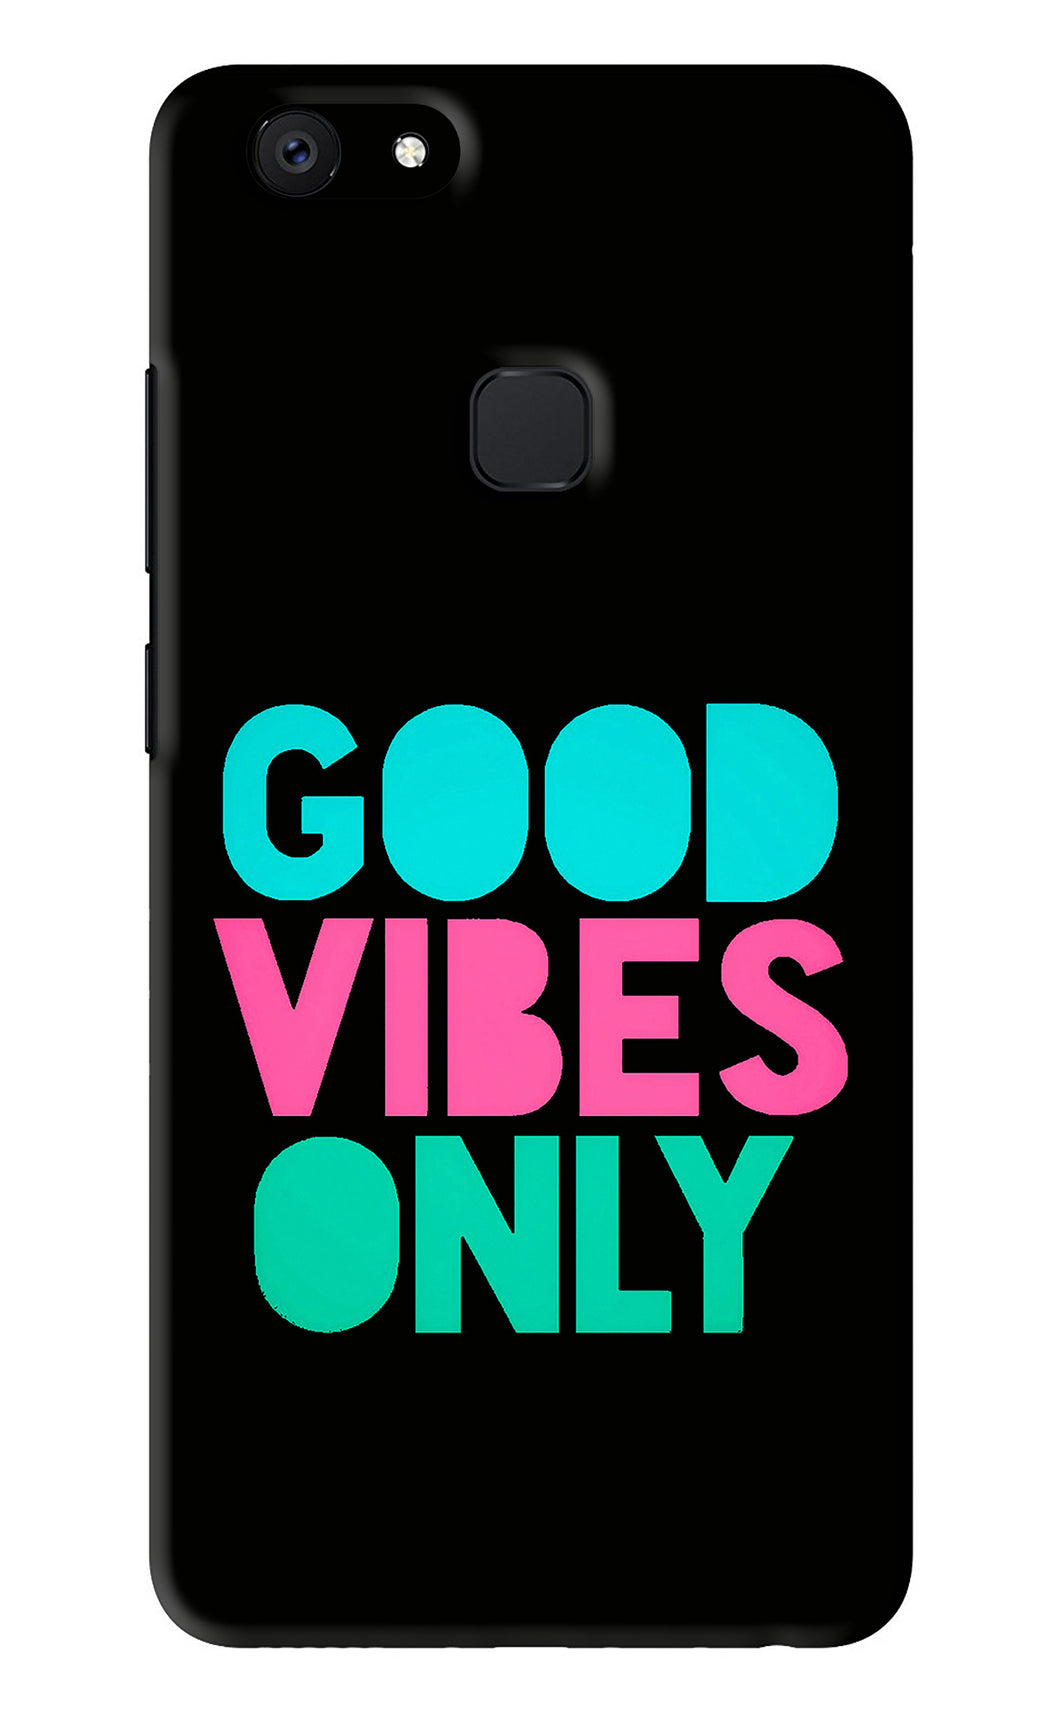 Quote Good Vibes Only Vivo V7 Back Skin Wrap